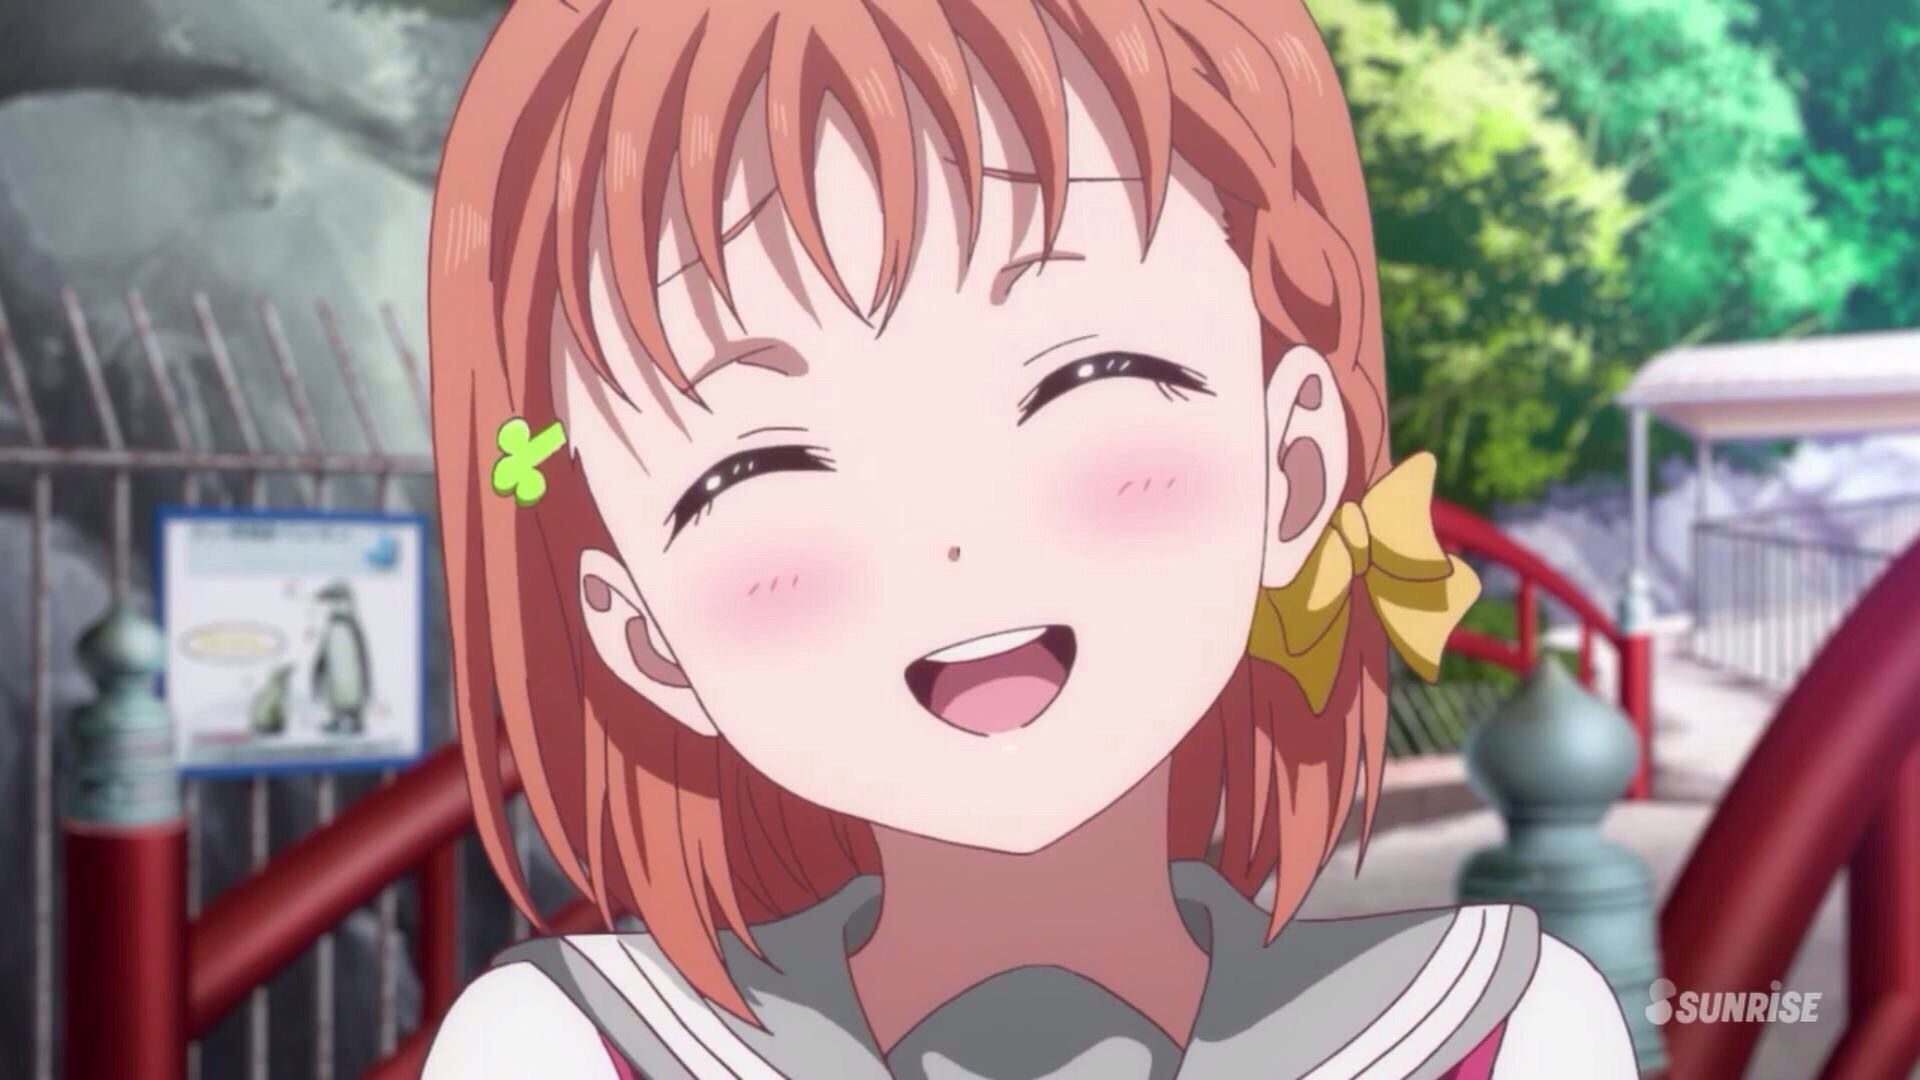 [Image] "love live! Sunshine "1000 songs she bend was its cute scene image competitions wwwwwwwwww 1